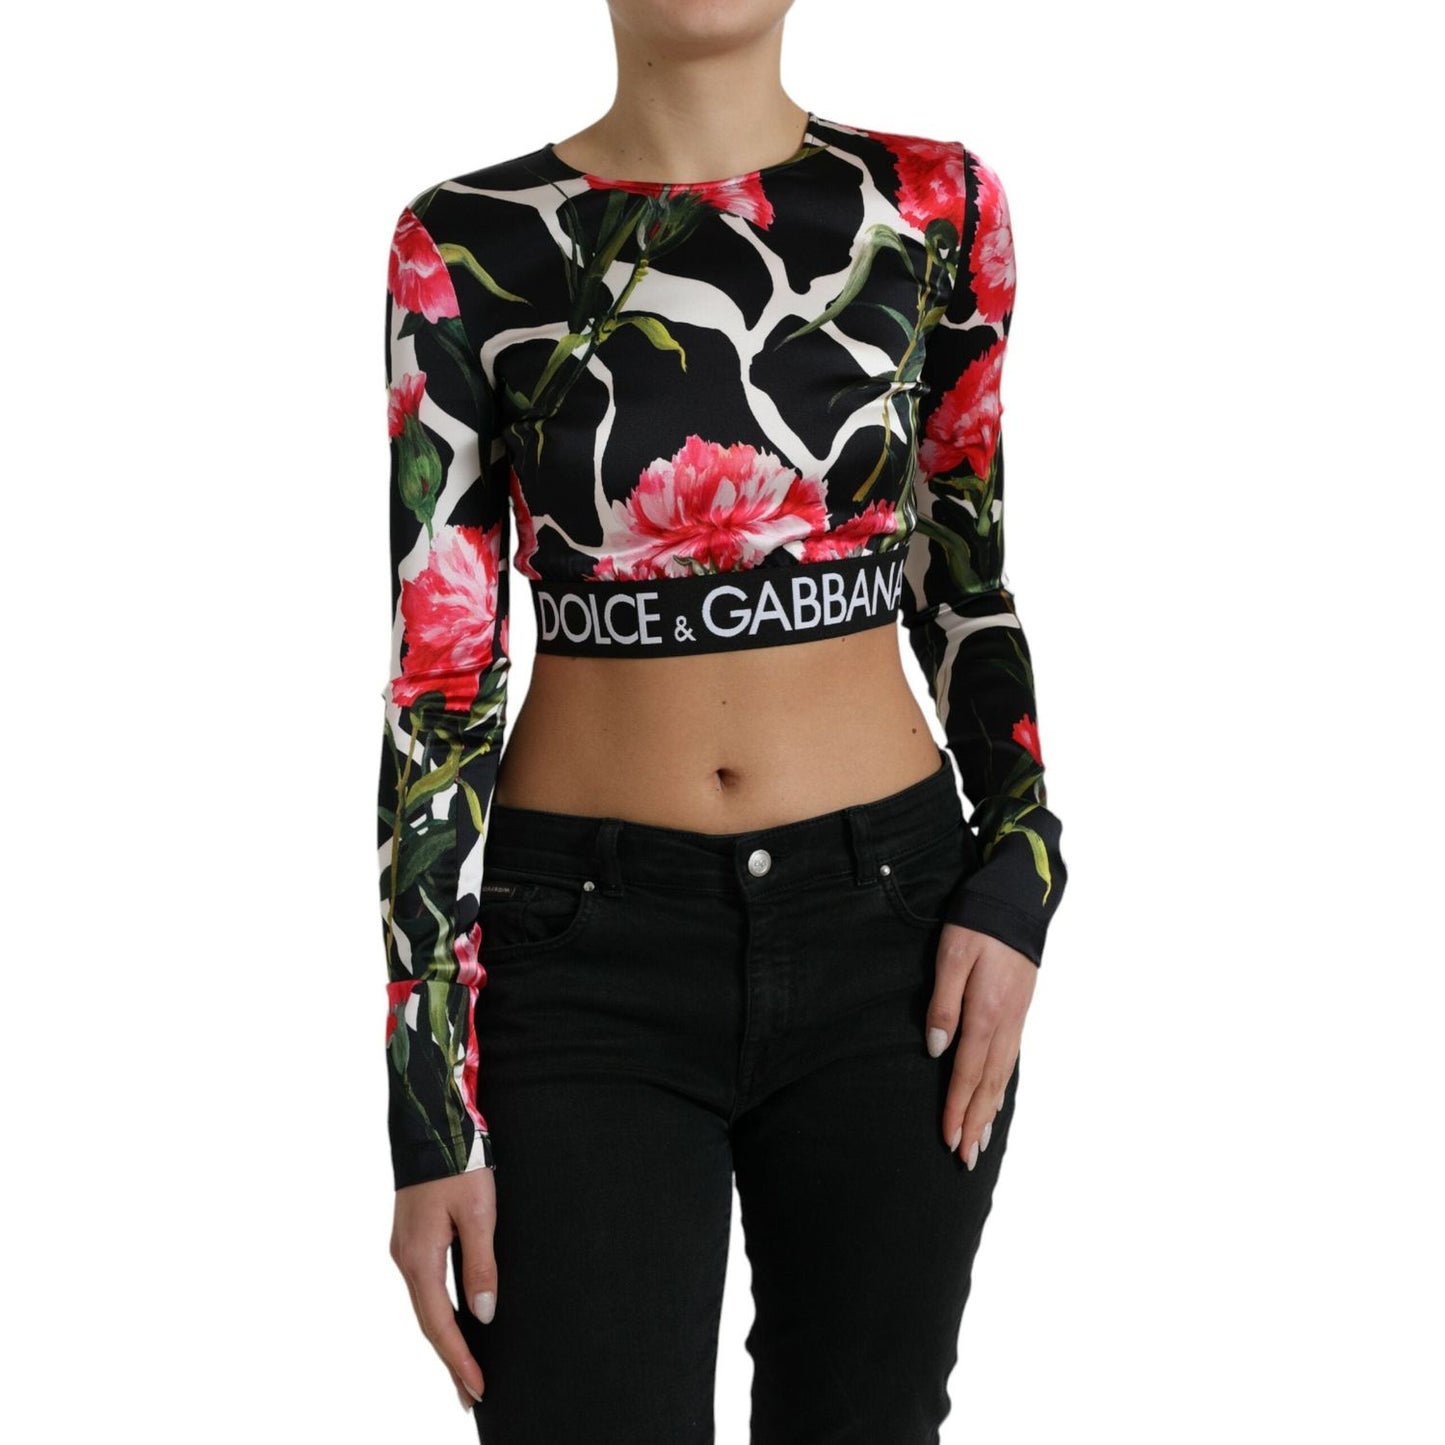 Dolce & Gabbana Elegant Floral Cropped Blouse Top multicolor-floral-long-sleeves-cropped-top-3